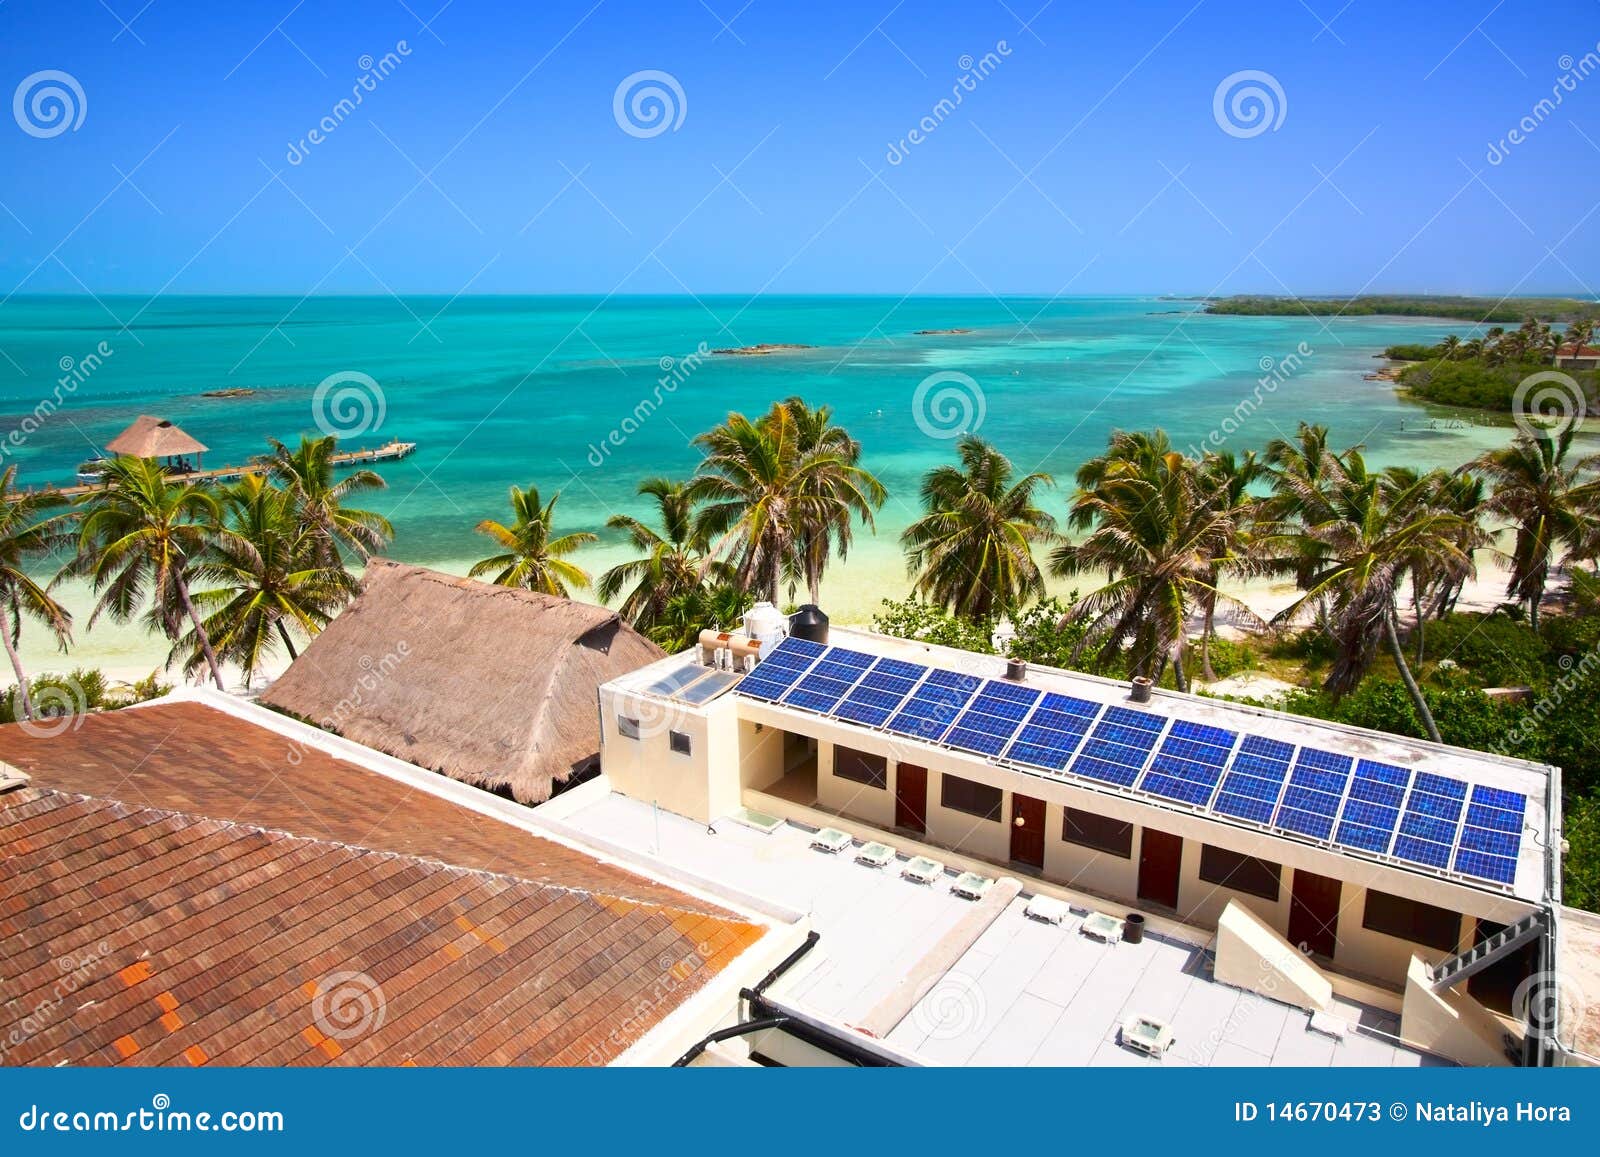 building with a solar panel on the isla contoy